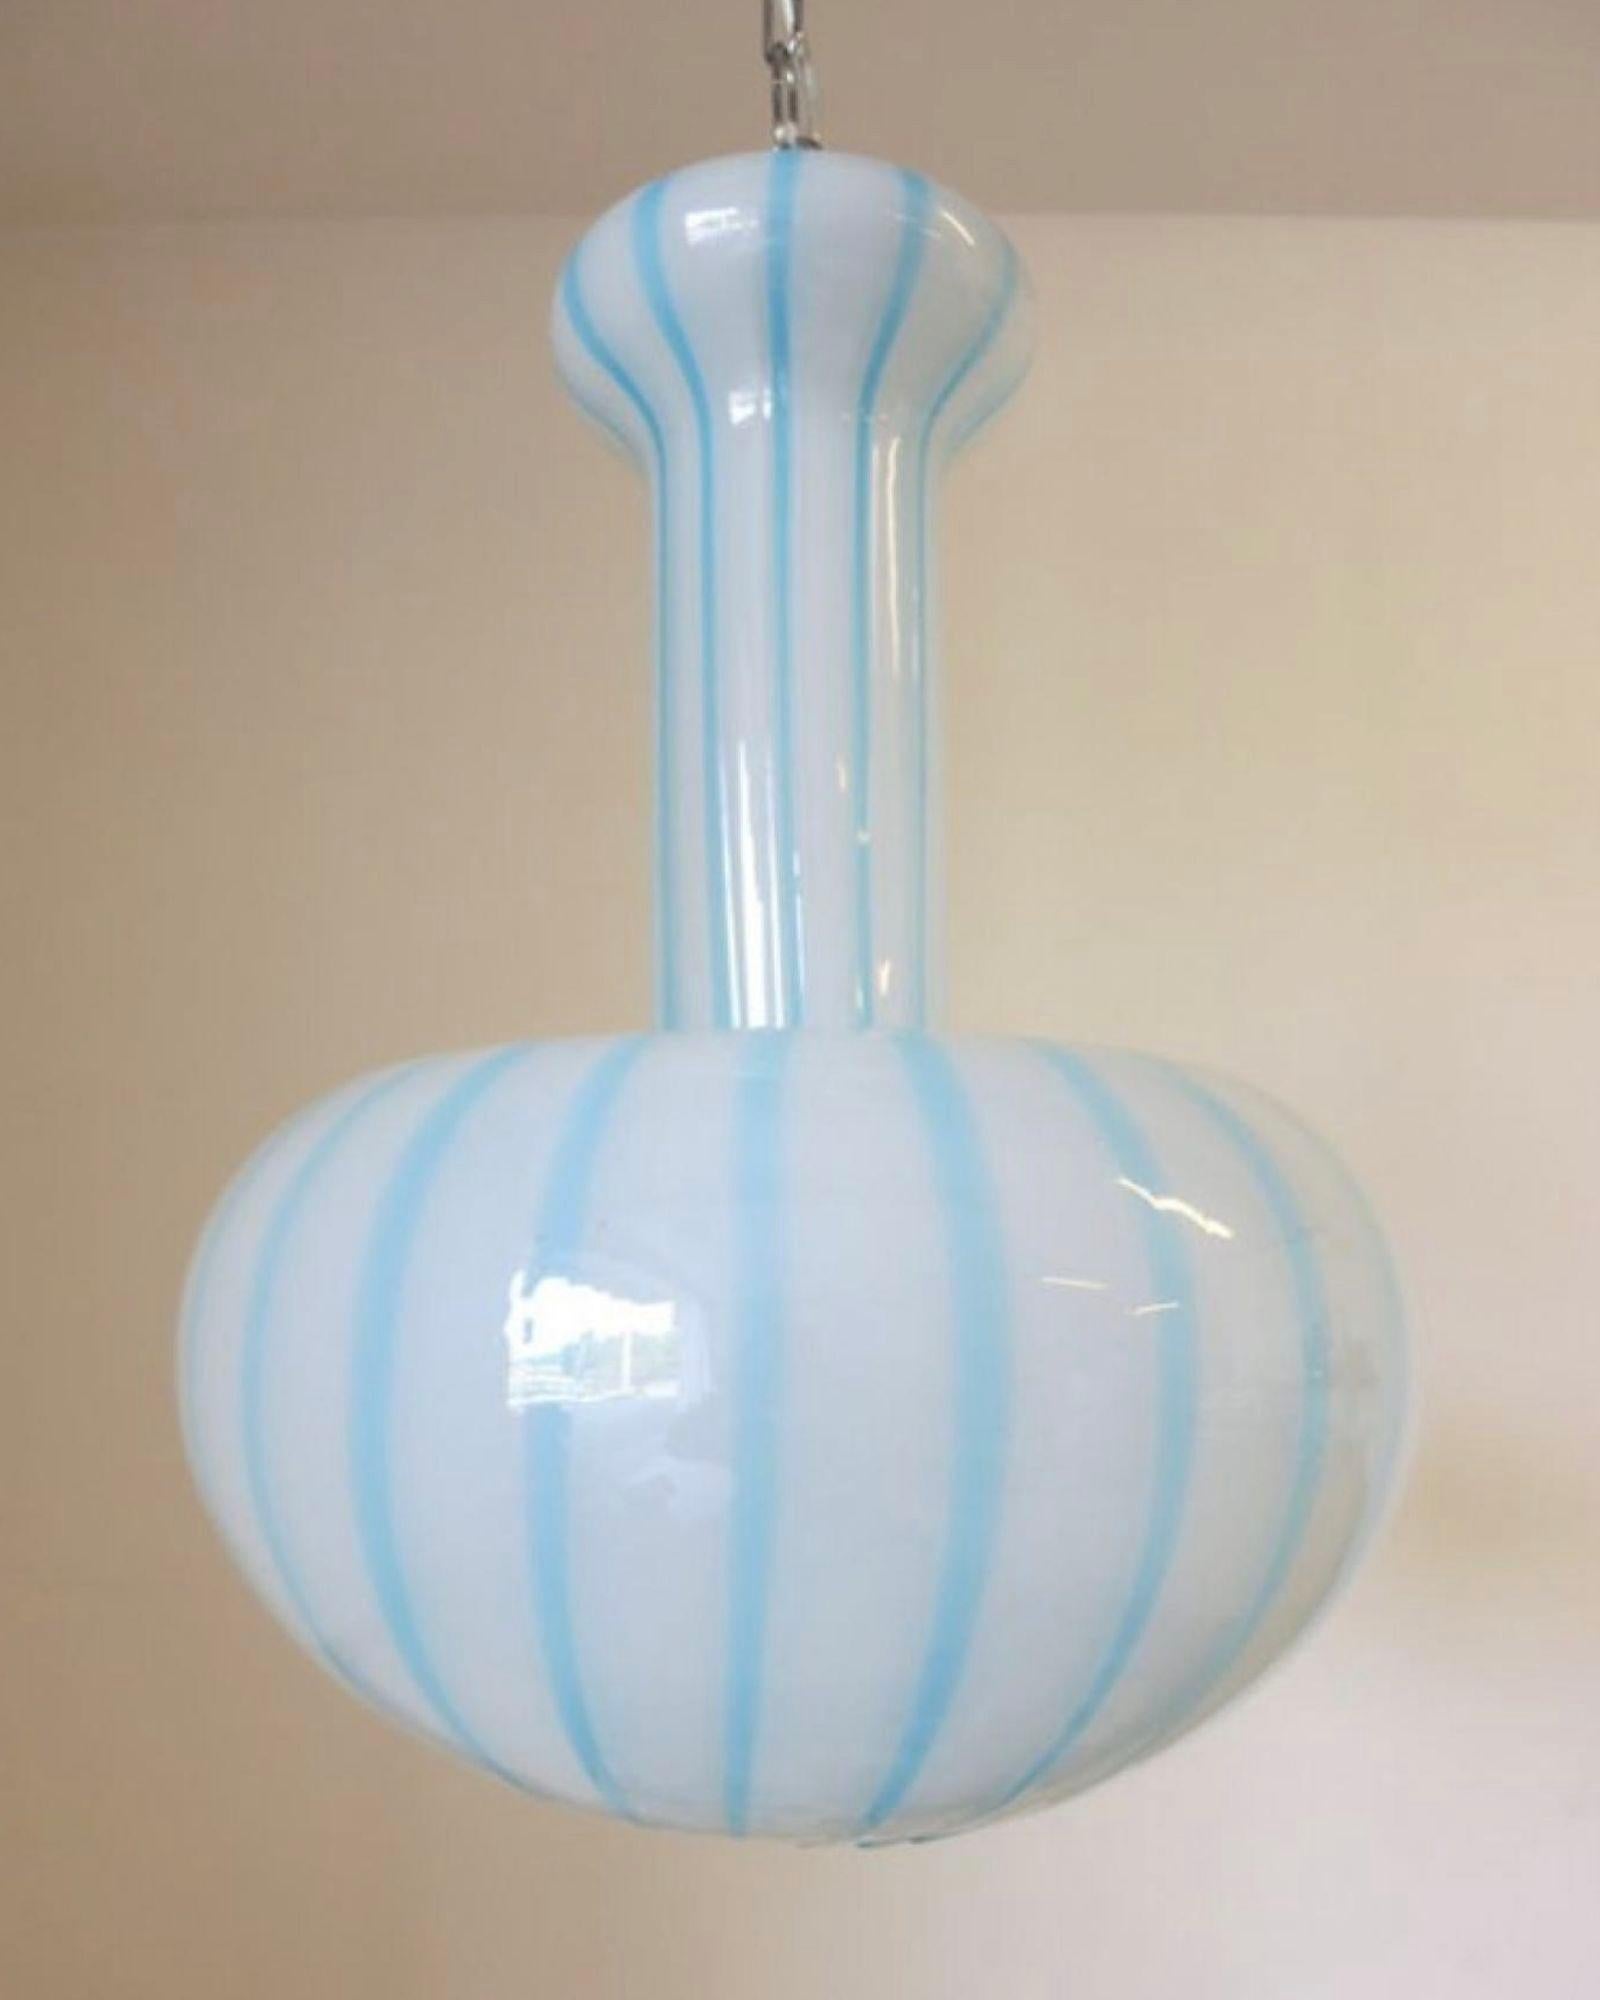 Italian vintage pendant with frosted white Murano glass and blue stripes / Designed by Salviati circa 1960’s / Made in Italy
3 lights / Measures: Height: 23 inches plus chain and canopy / Diameter: 15 inches.